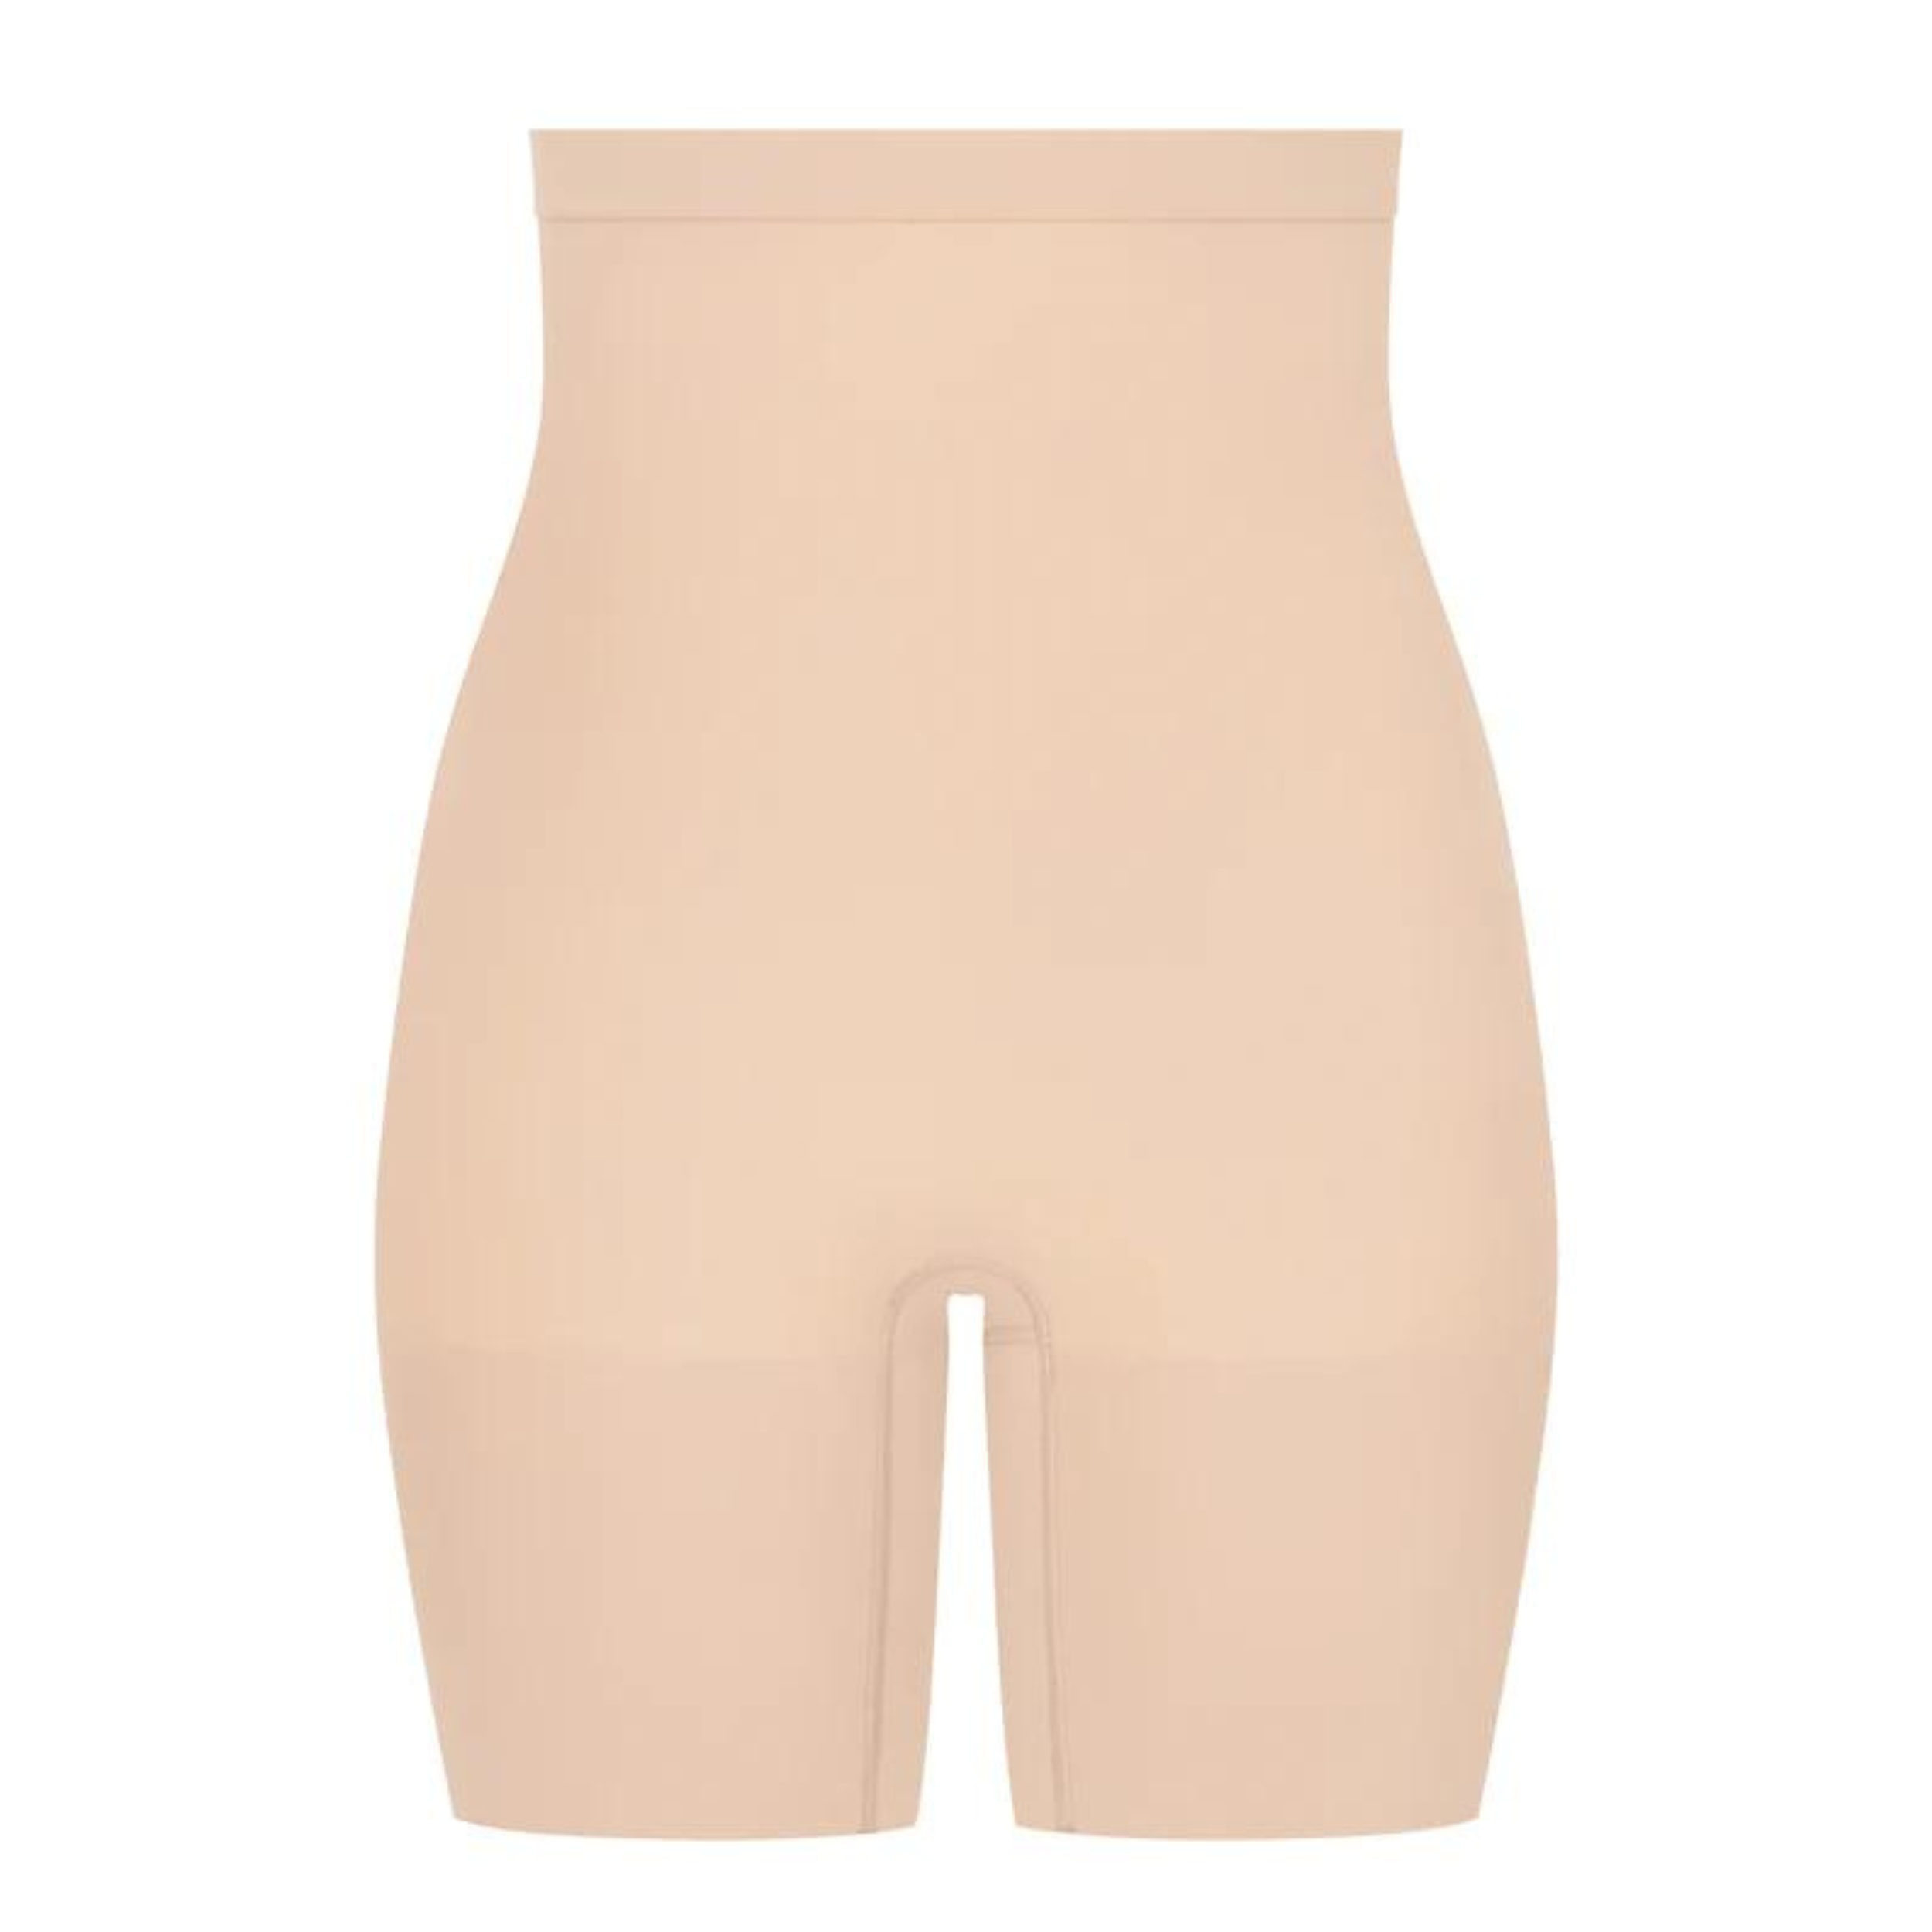 SPANX | Higher Power Shorts in Soft Nude